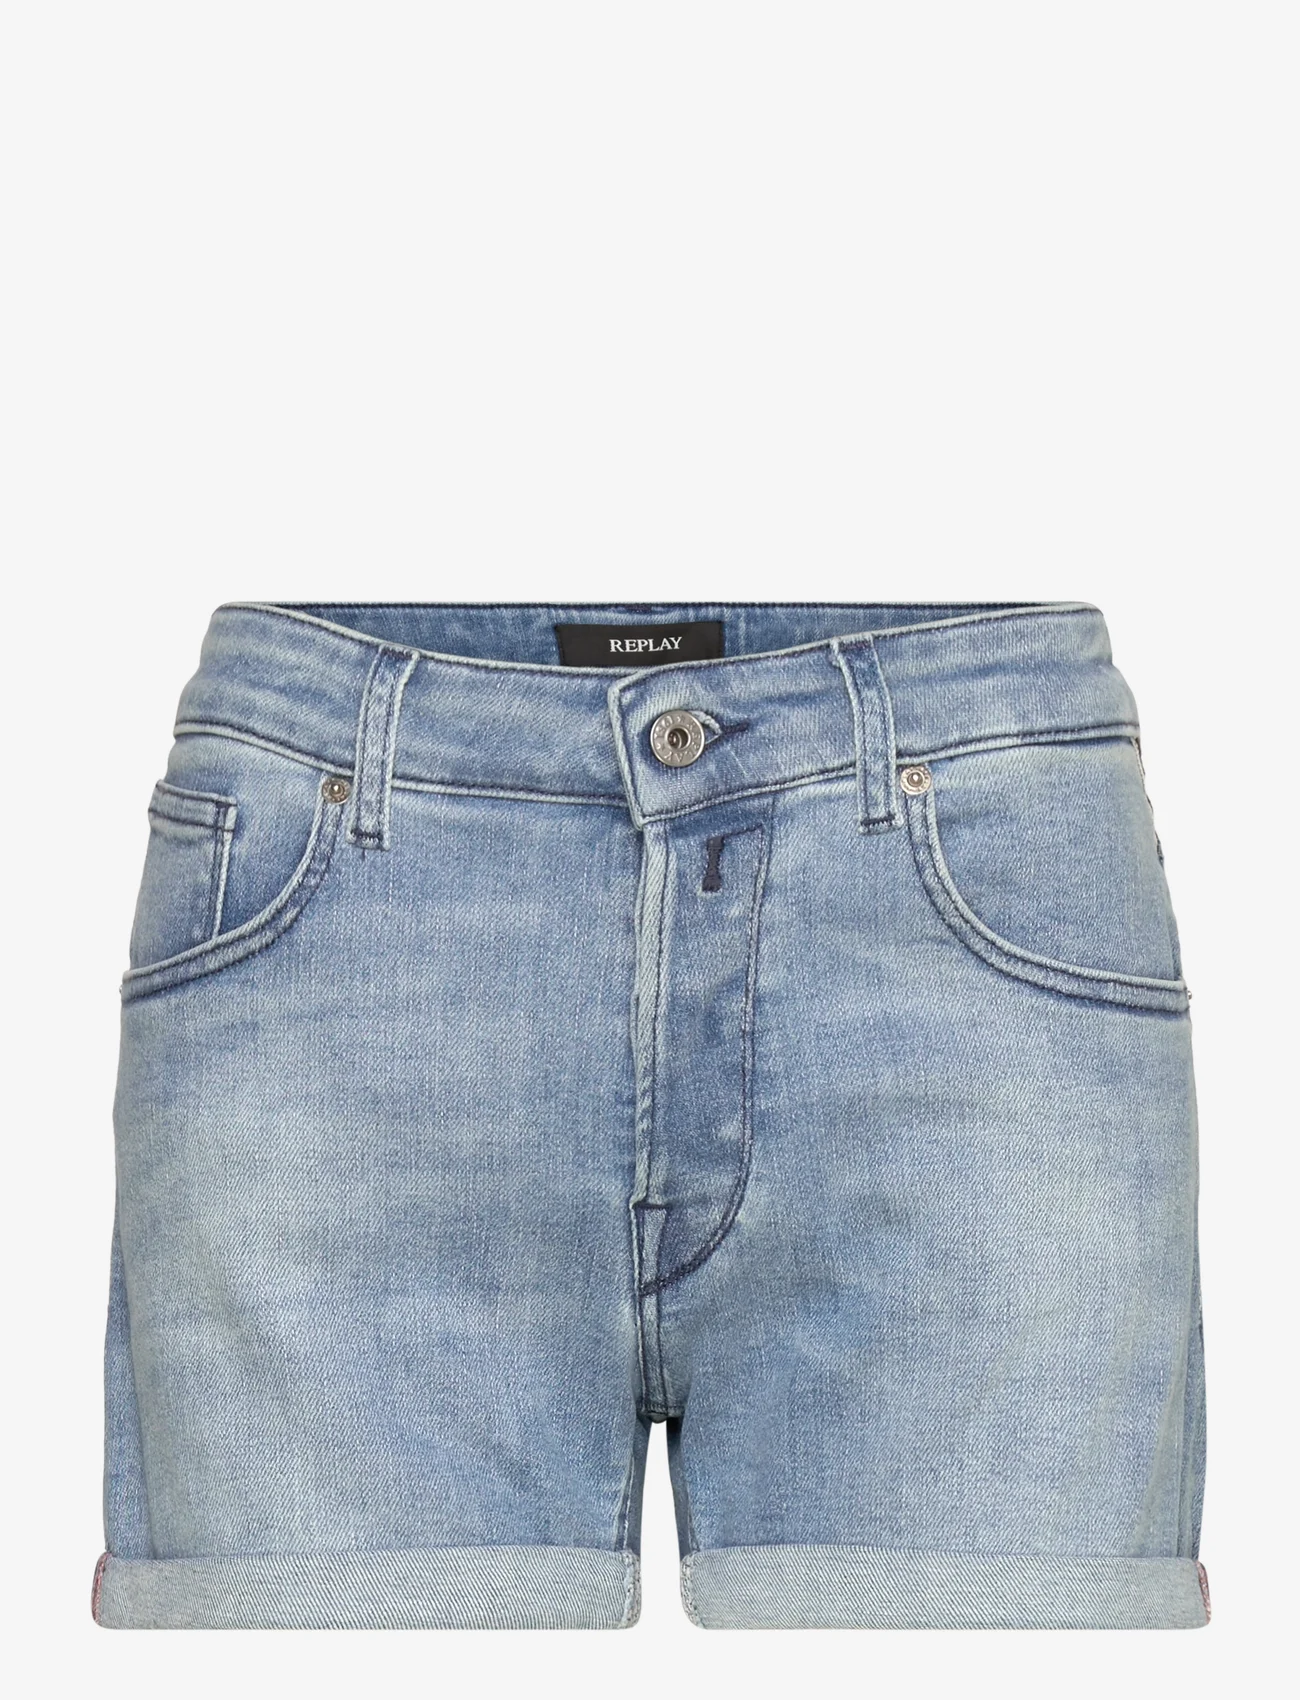 Replay - ANYTA Shorts  C-Stretch - jeansshorts - blue - 0